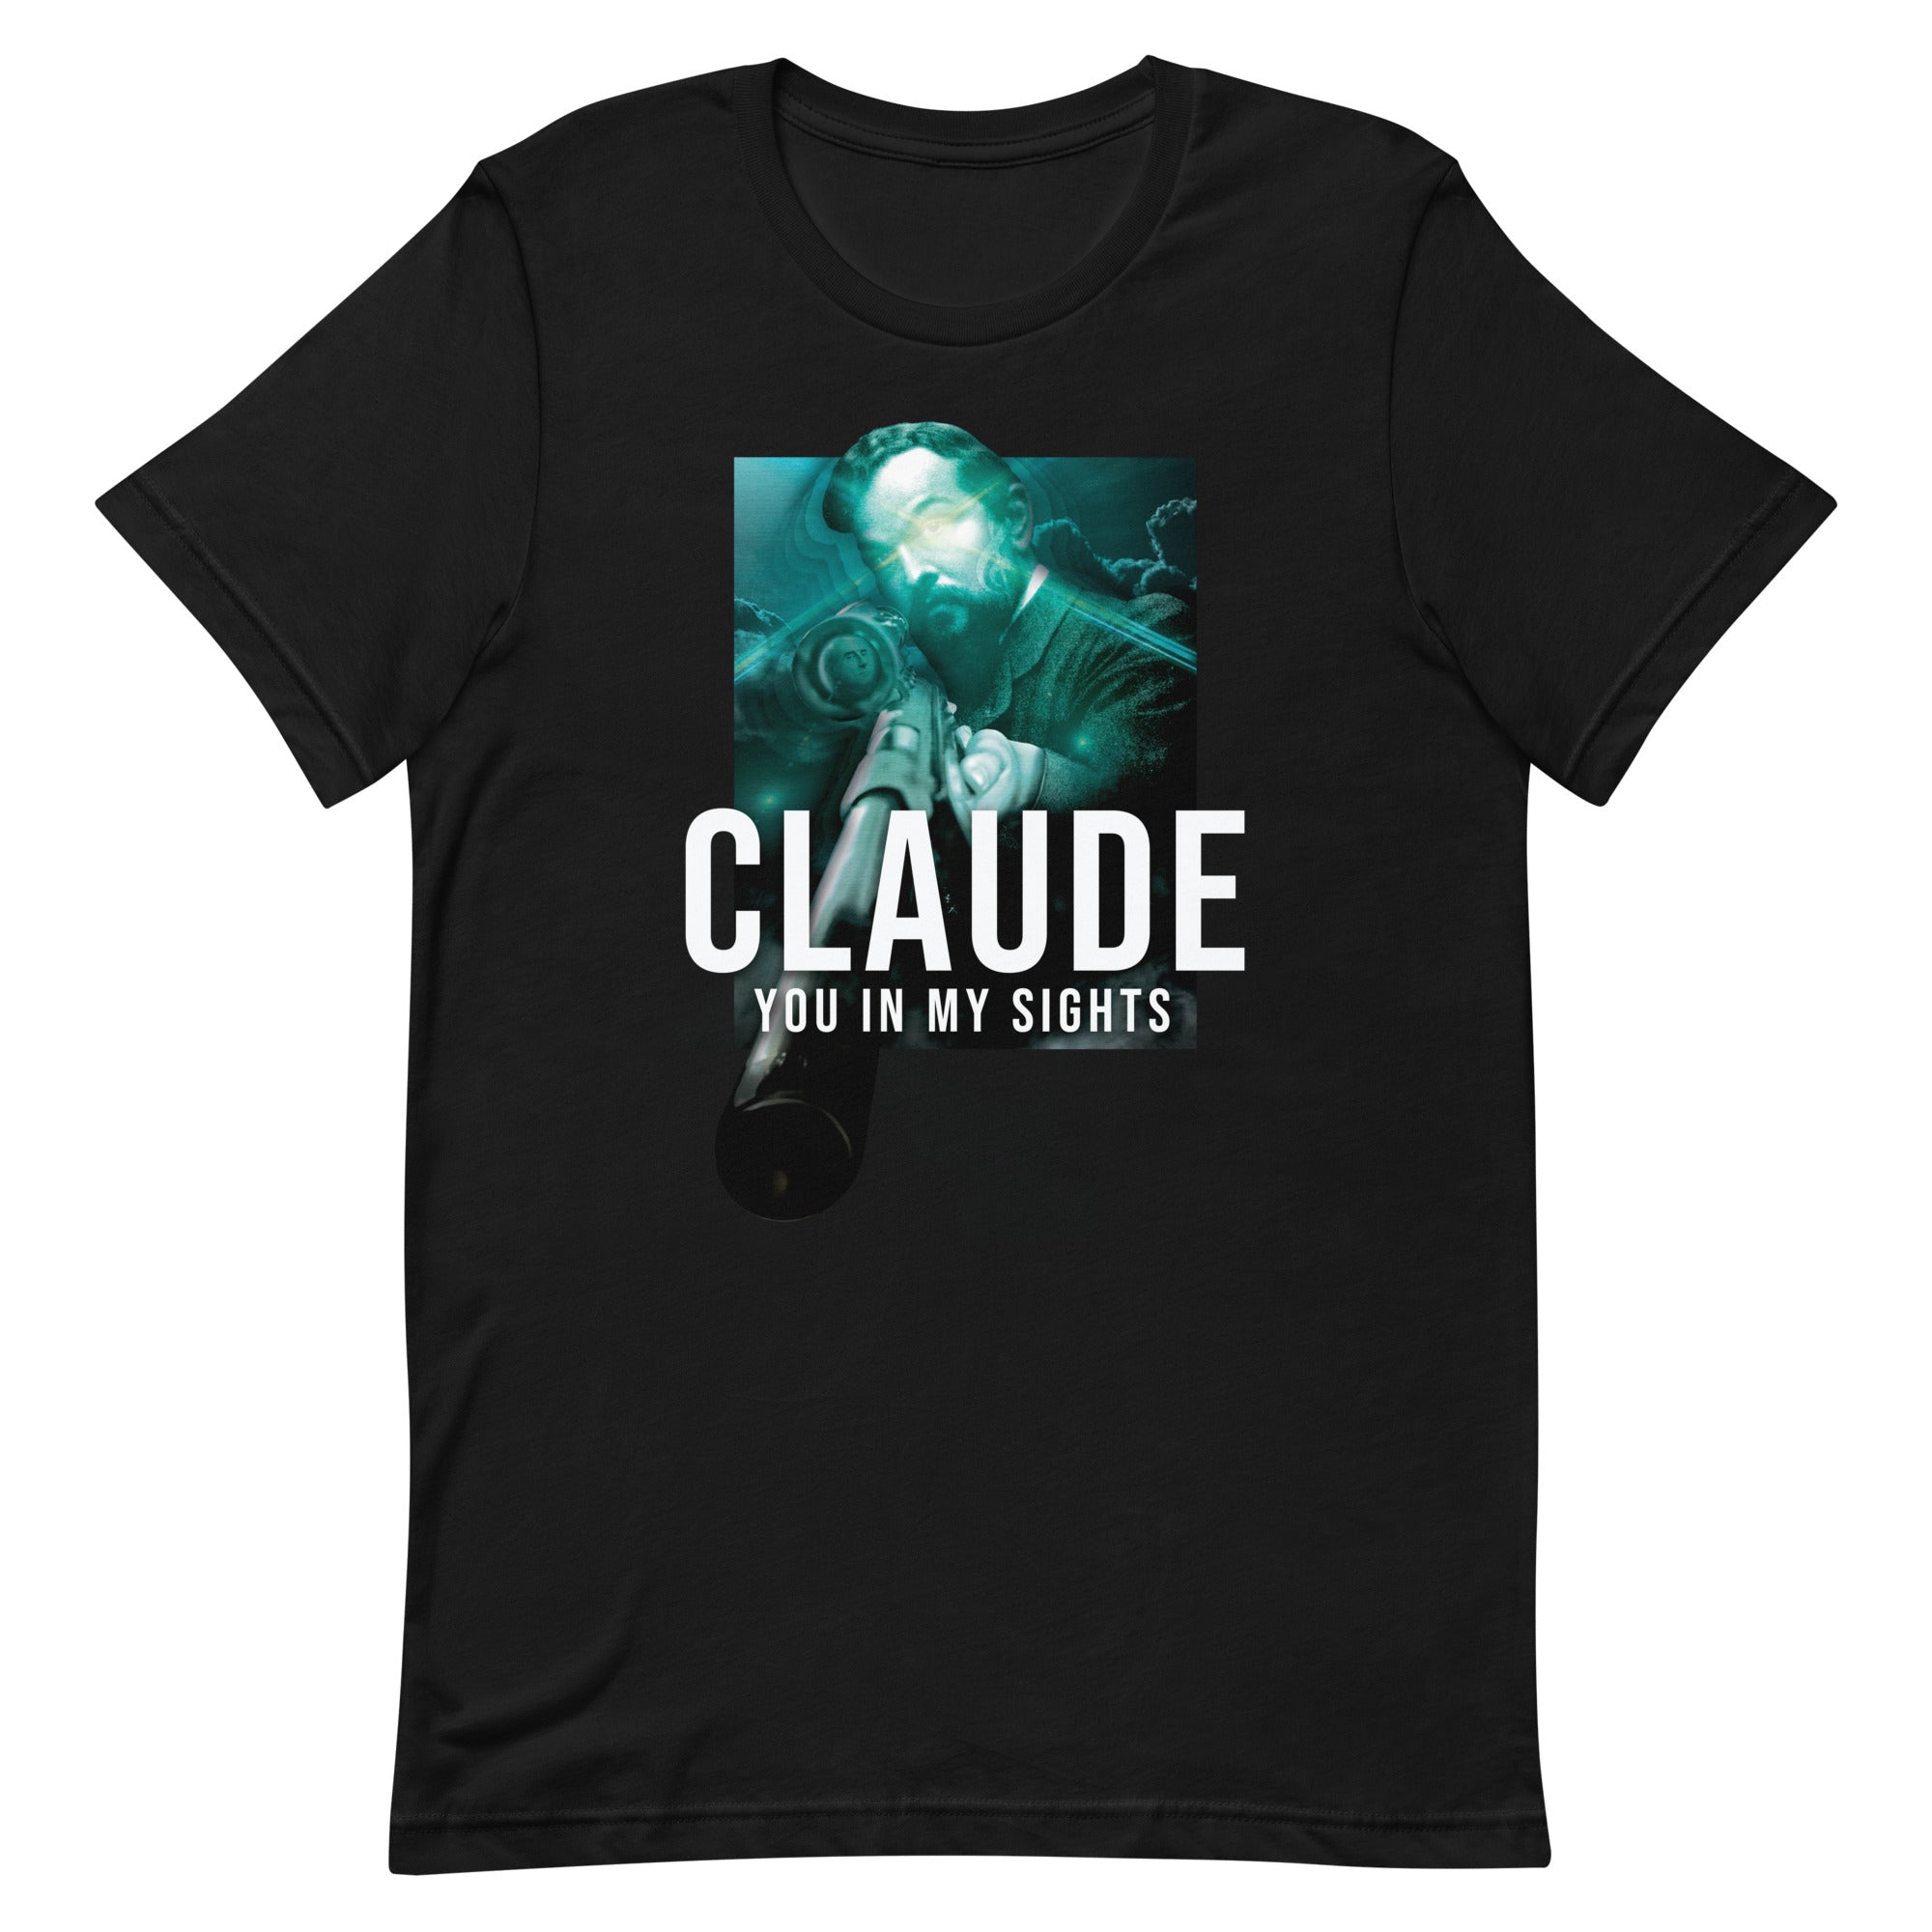 CLAUDE Tshirt - Lord of the Chords